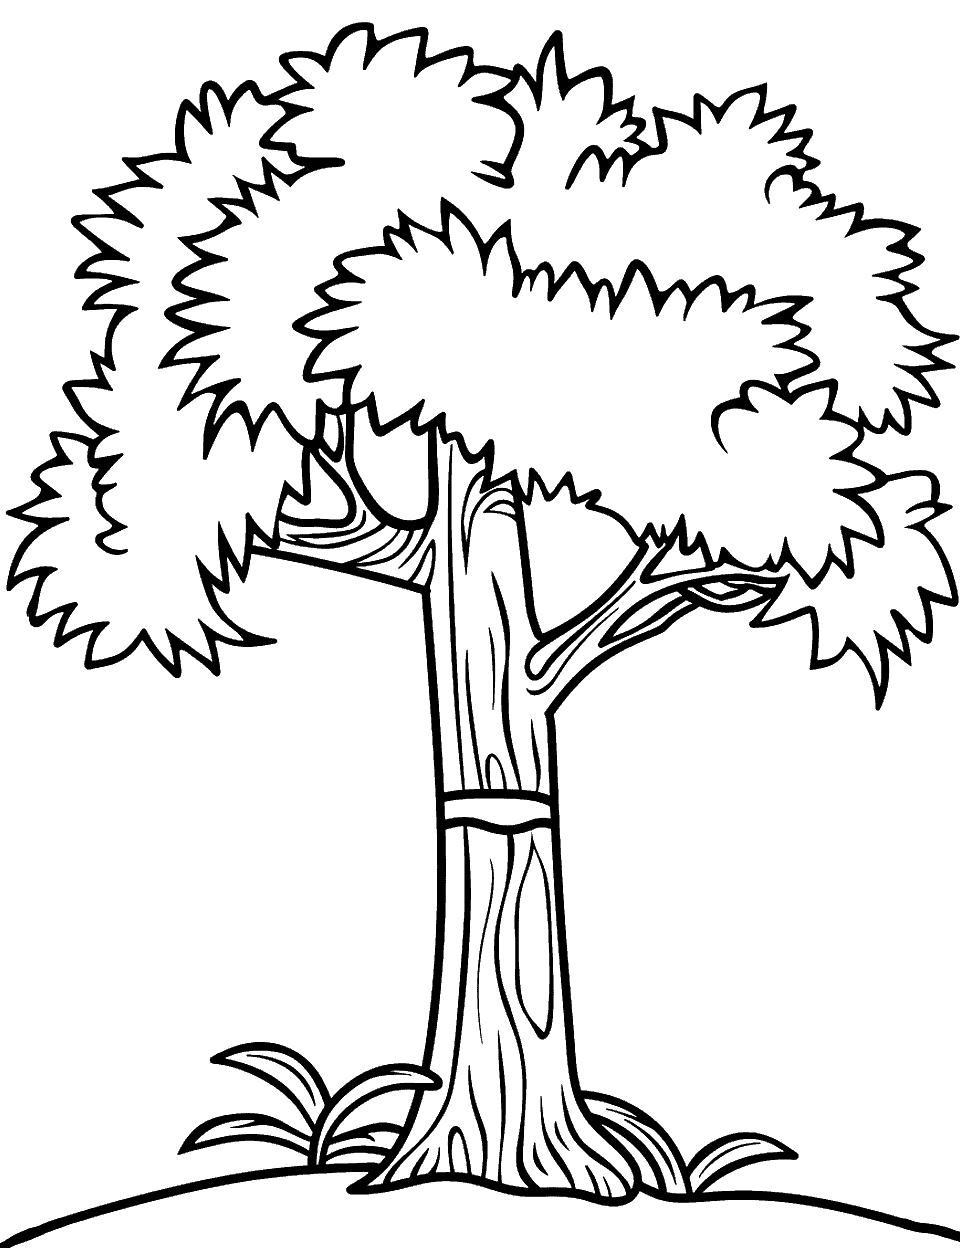 Simple Oak Tree Coloring Page - A large oak tree with a thick trunk and expansive branches, standing alone.